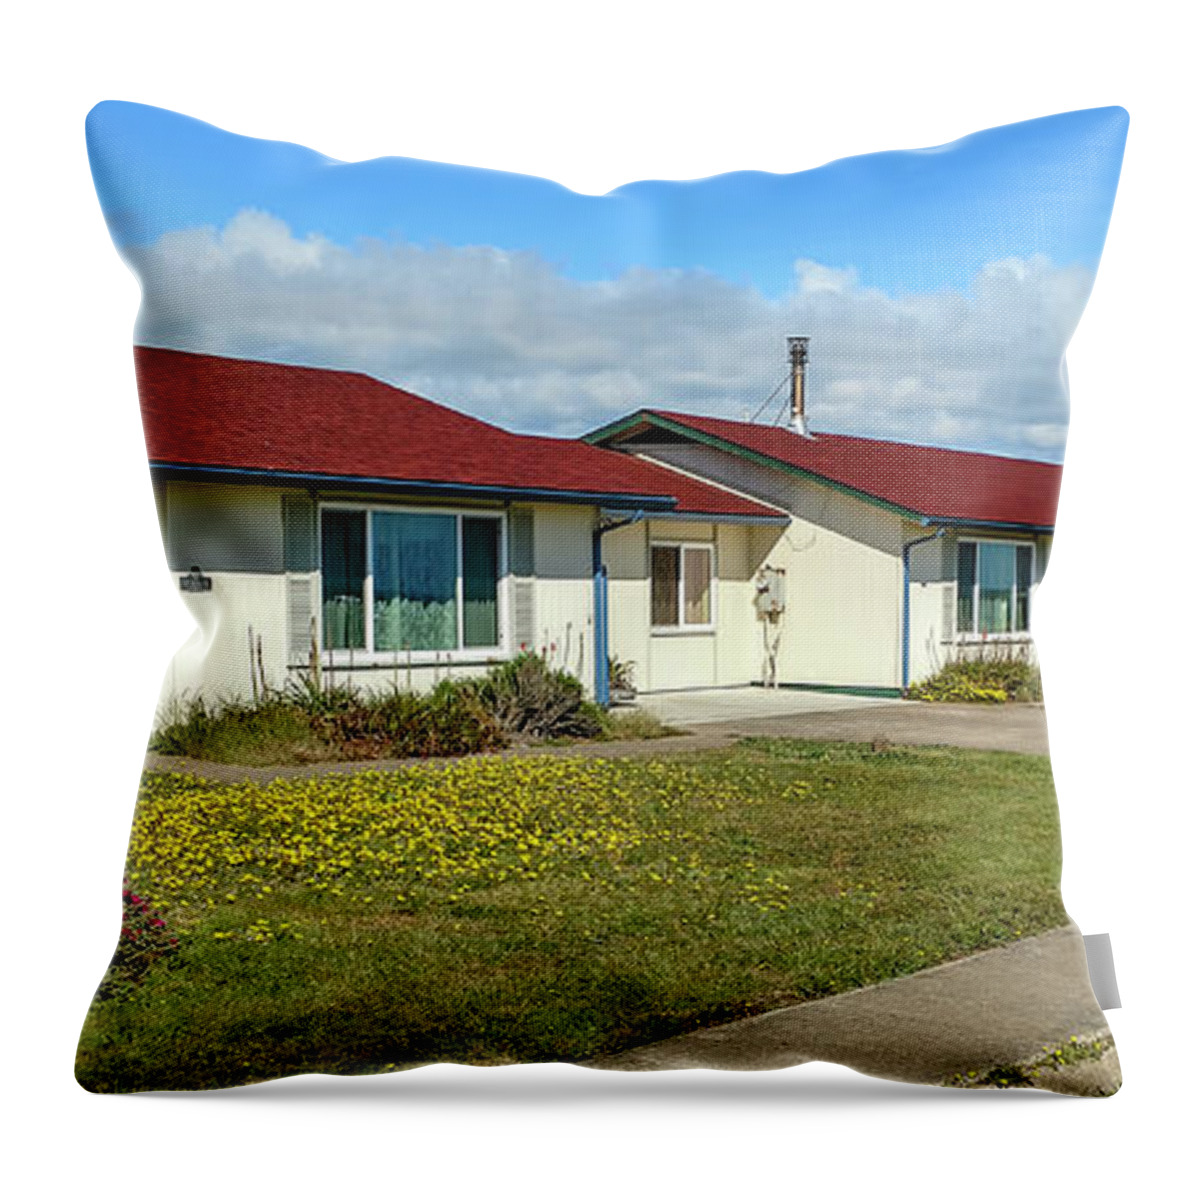 Point Arena Lighthouse Throw Pillow featuring the photograph Point Arena Lighthouse Keeper's Houses Lodging by David Oppenheimer